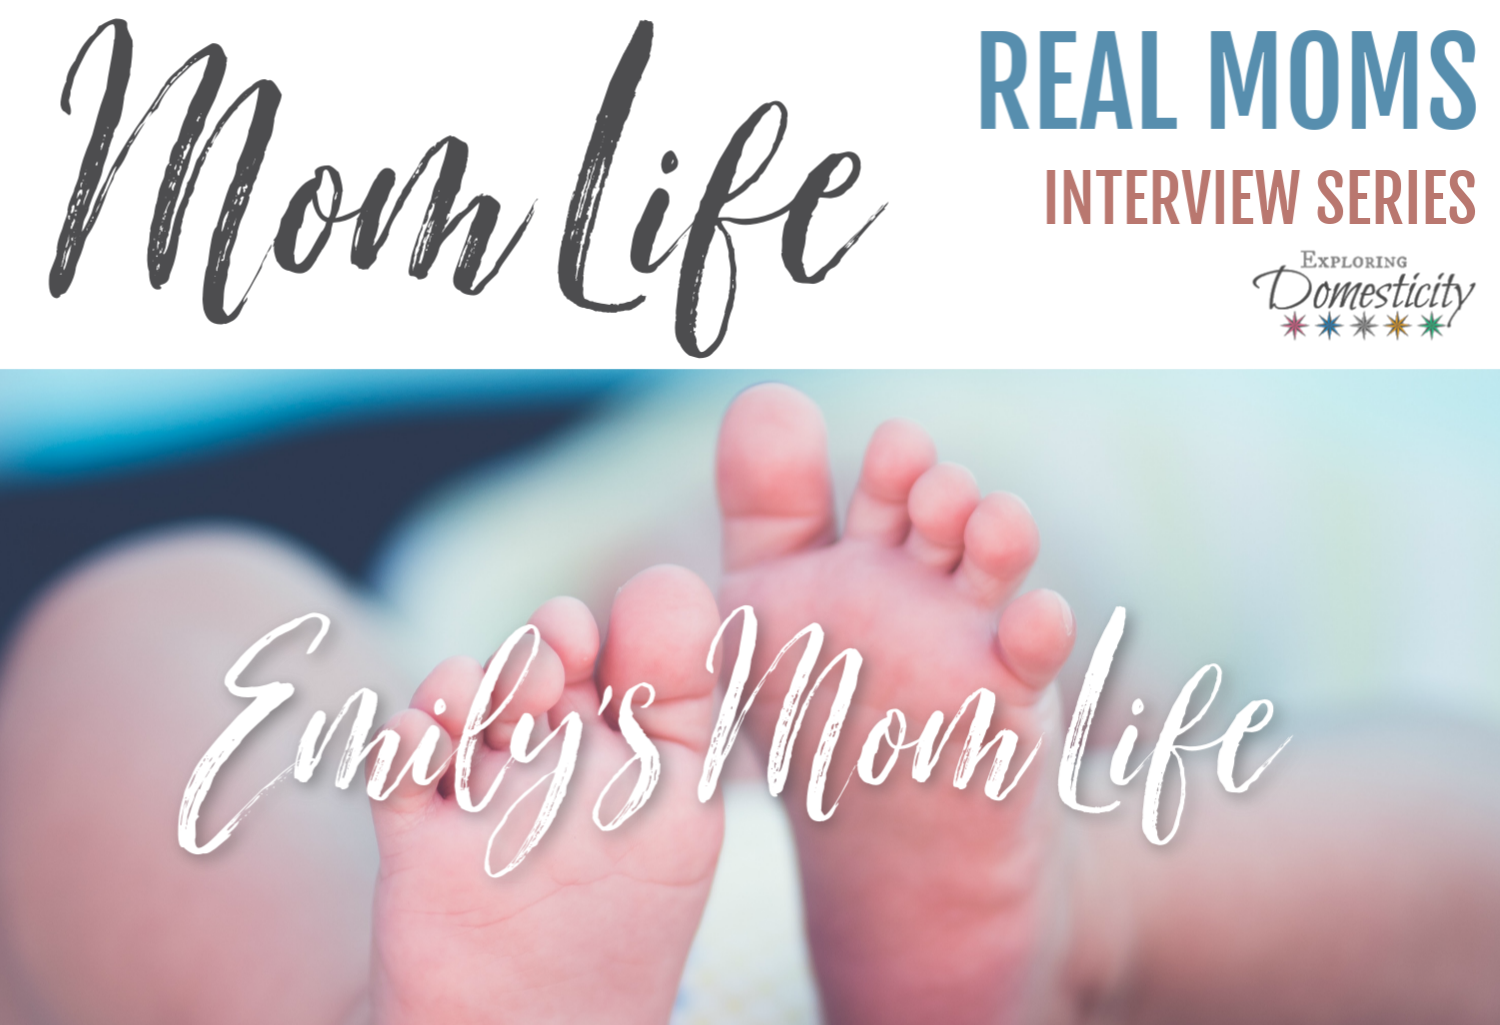 Emily's Mom Life: Real Moms Interview Series